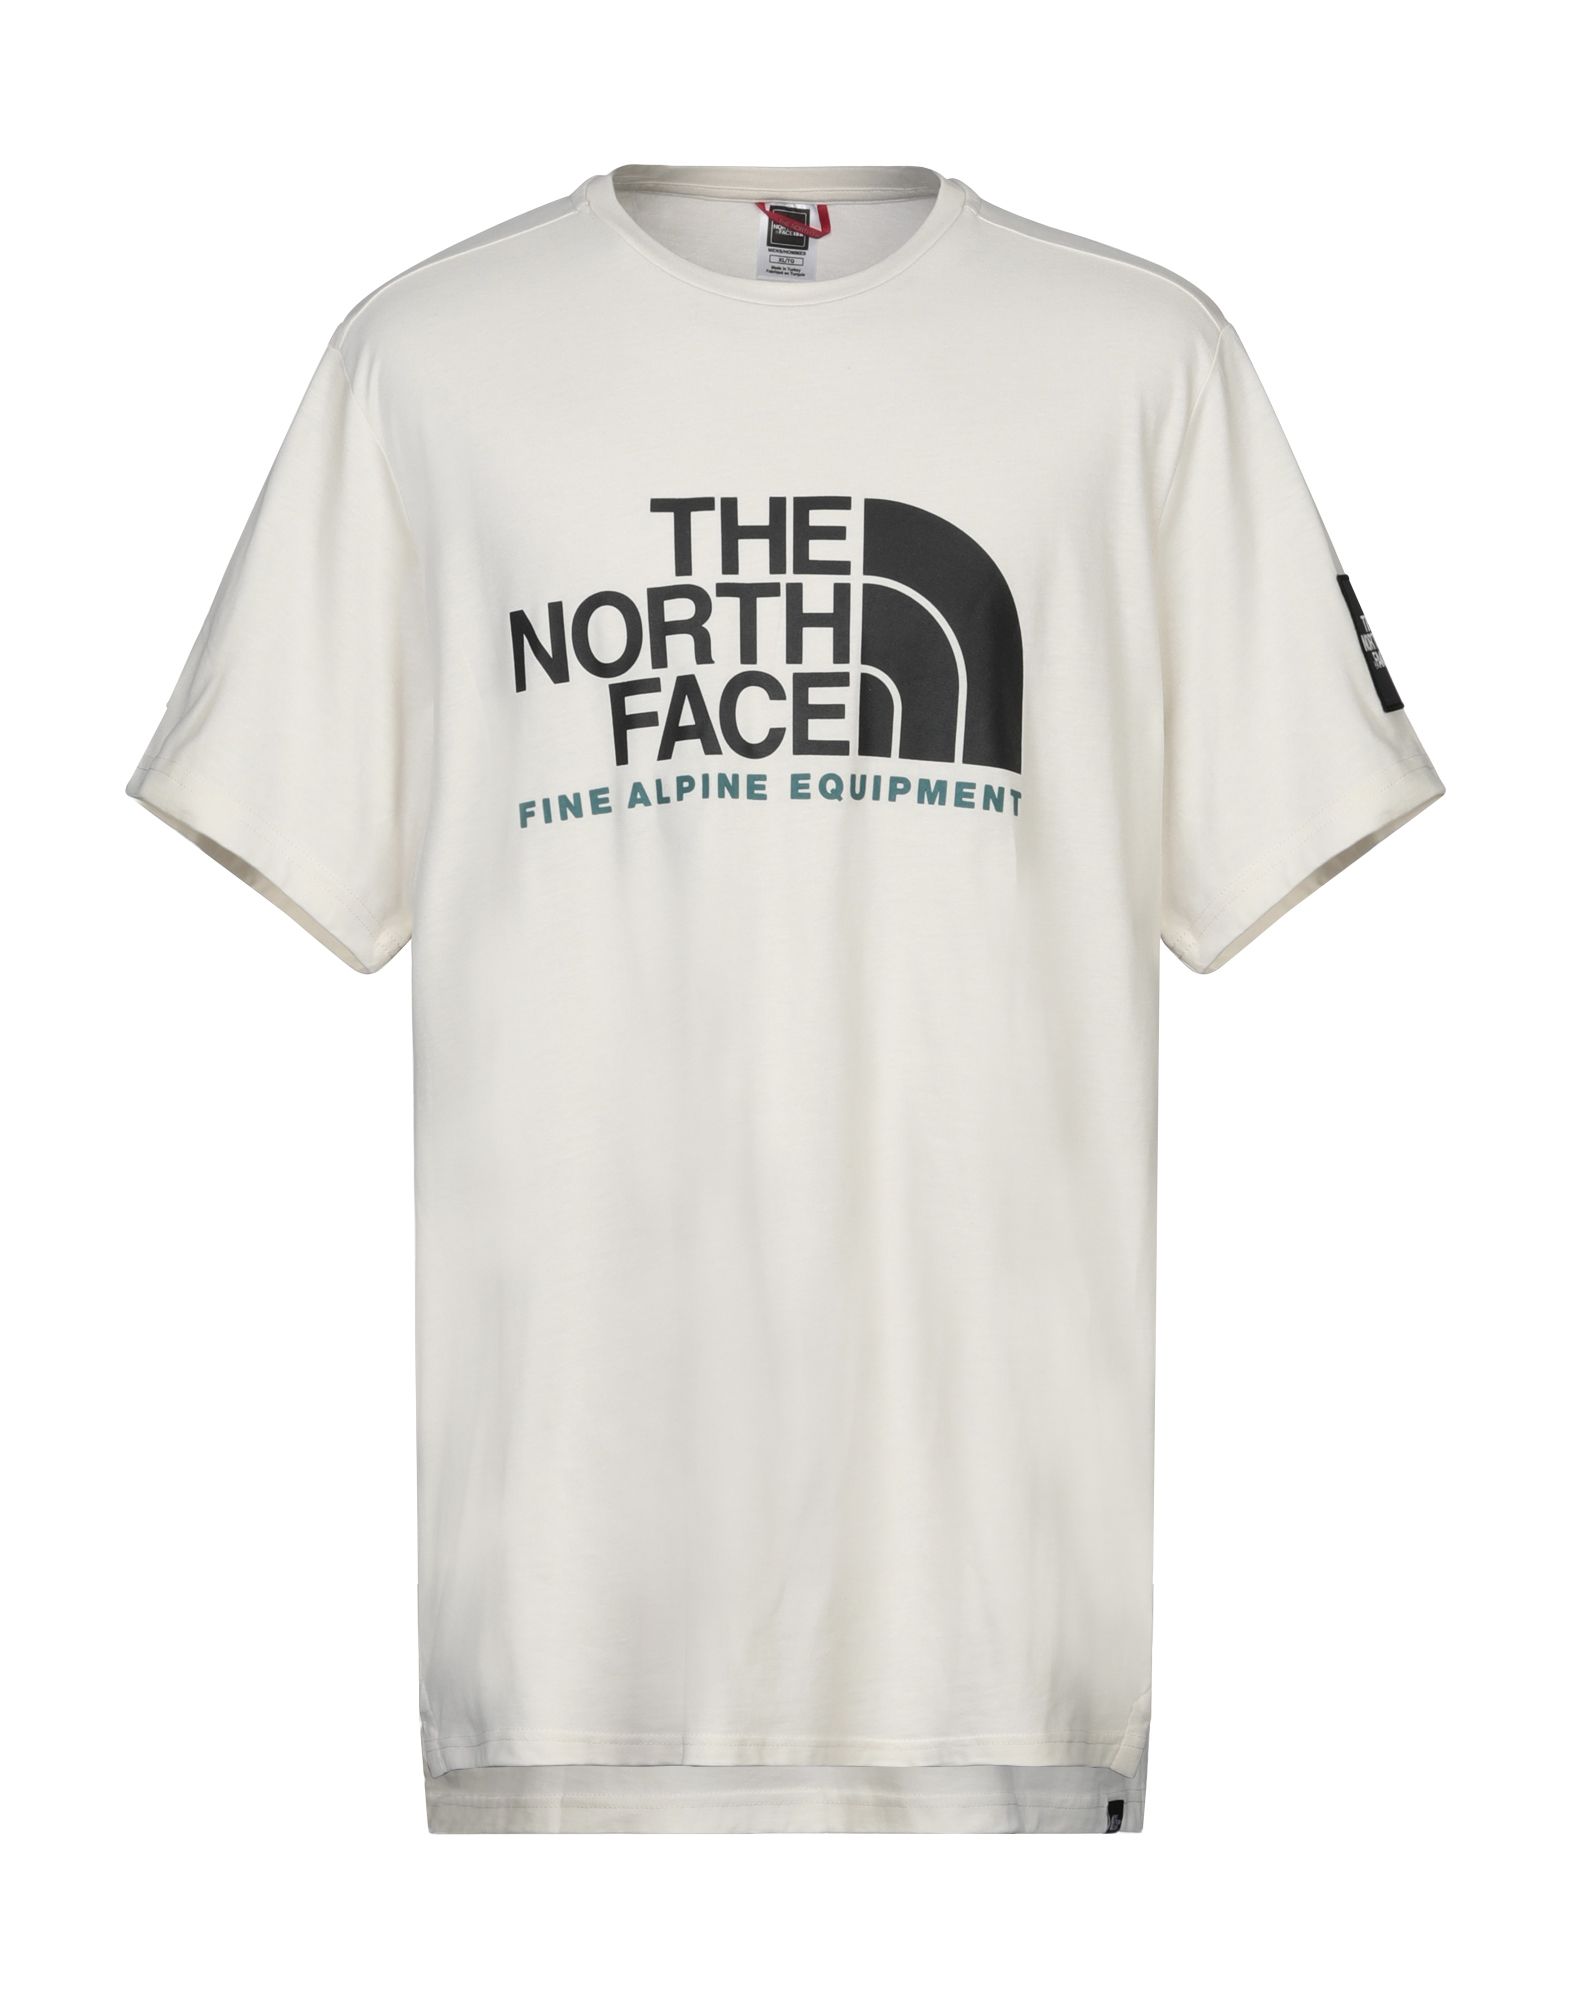 THE NORTH FACE T-shirts - Item 12390718